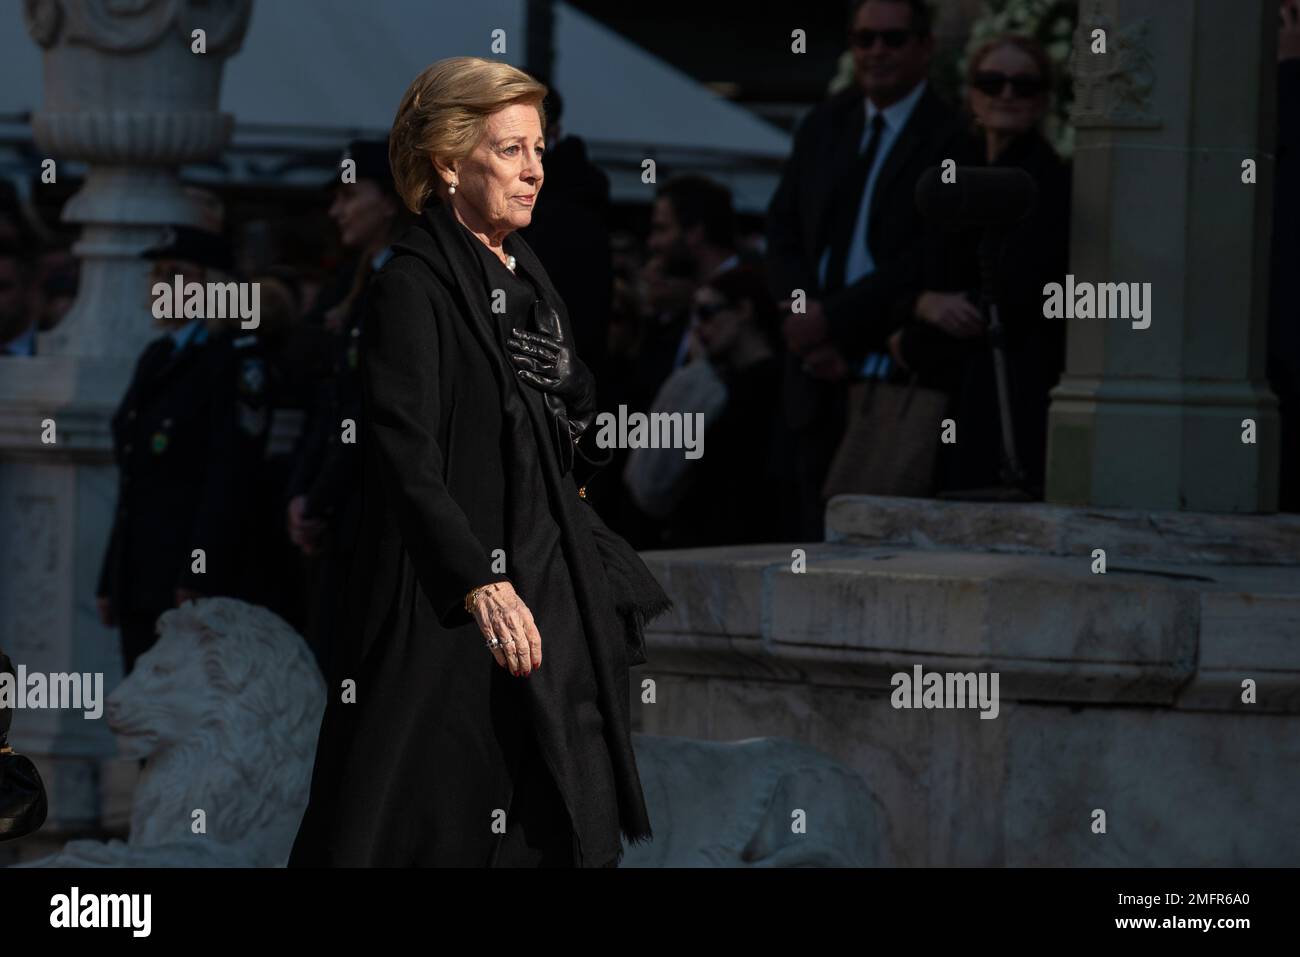 Athens, Greece. 16th January 2023. Queen Anne-Marie arrives for the funeral of the former King Constantine II of Greece at the Metropolitan Cathedral of Athens. Credit: Nicolas Koutsokostas/Alamy Stock Photo. Stock Photo